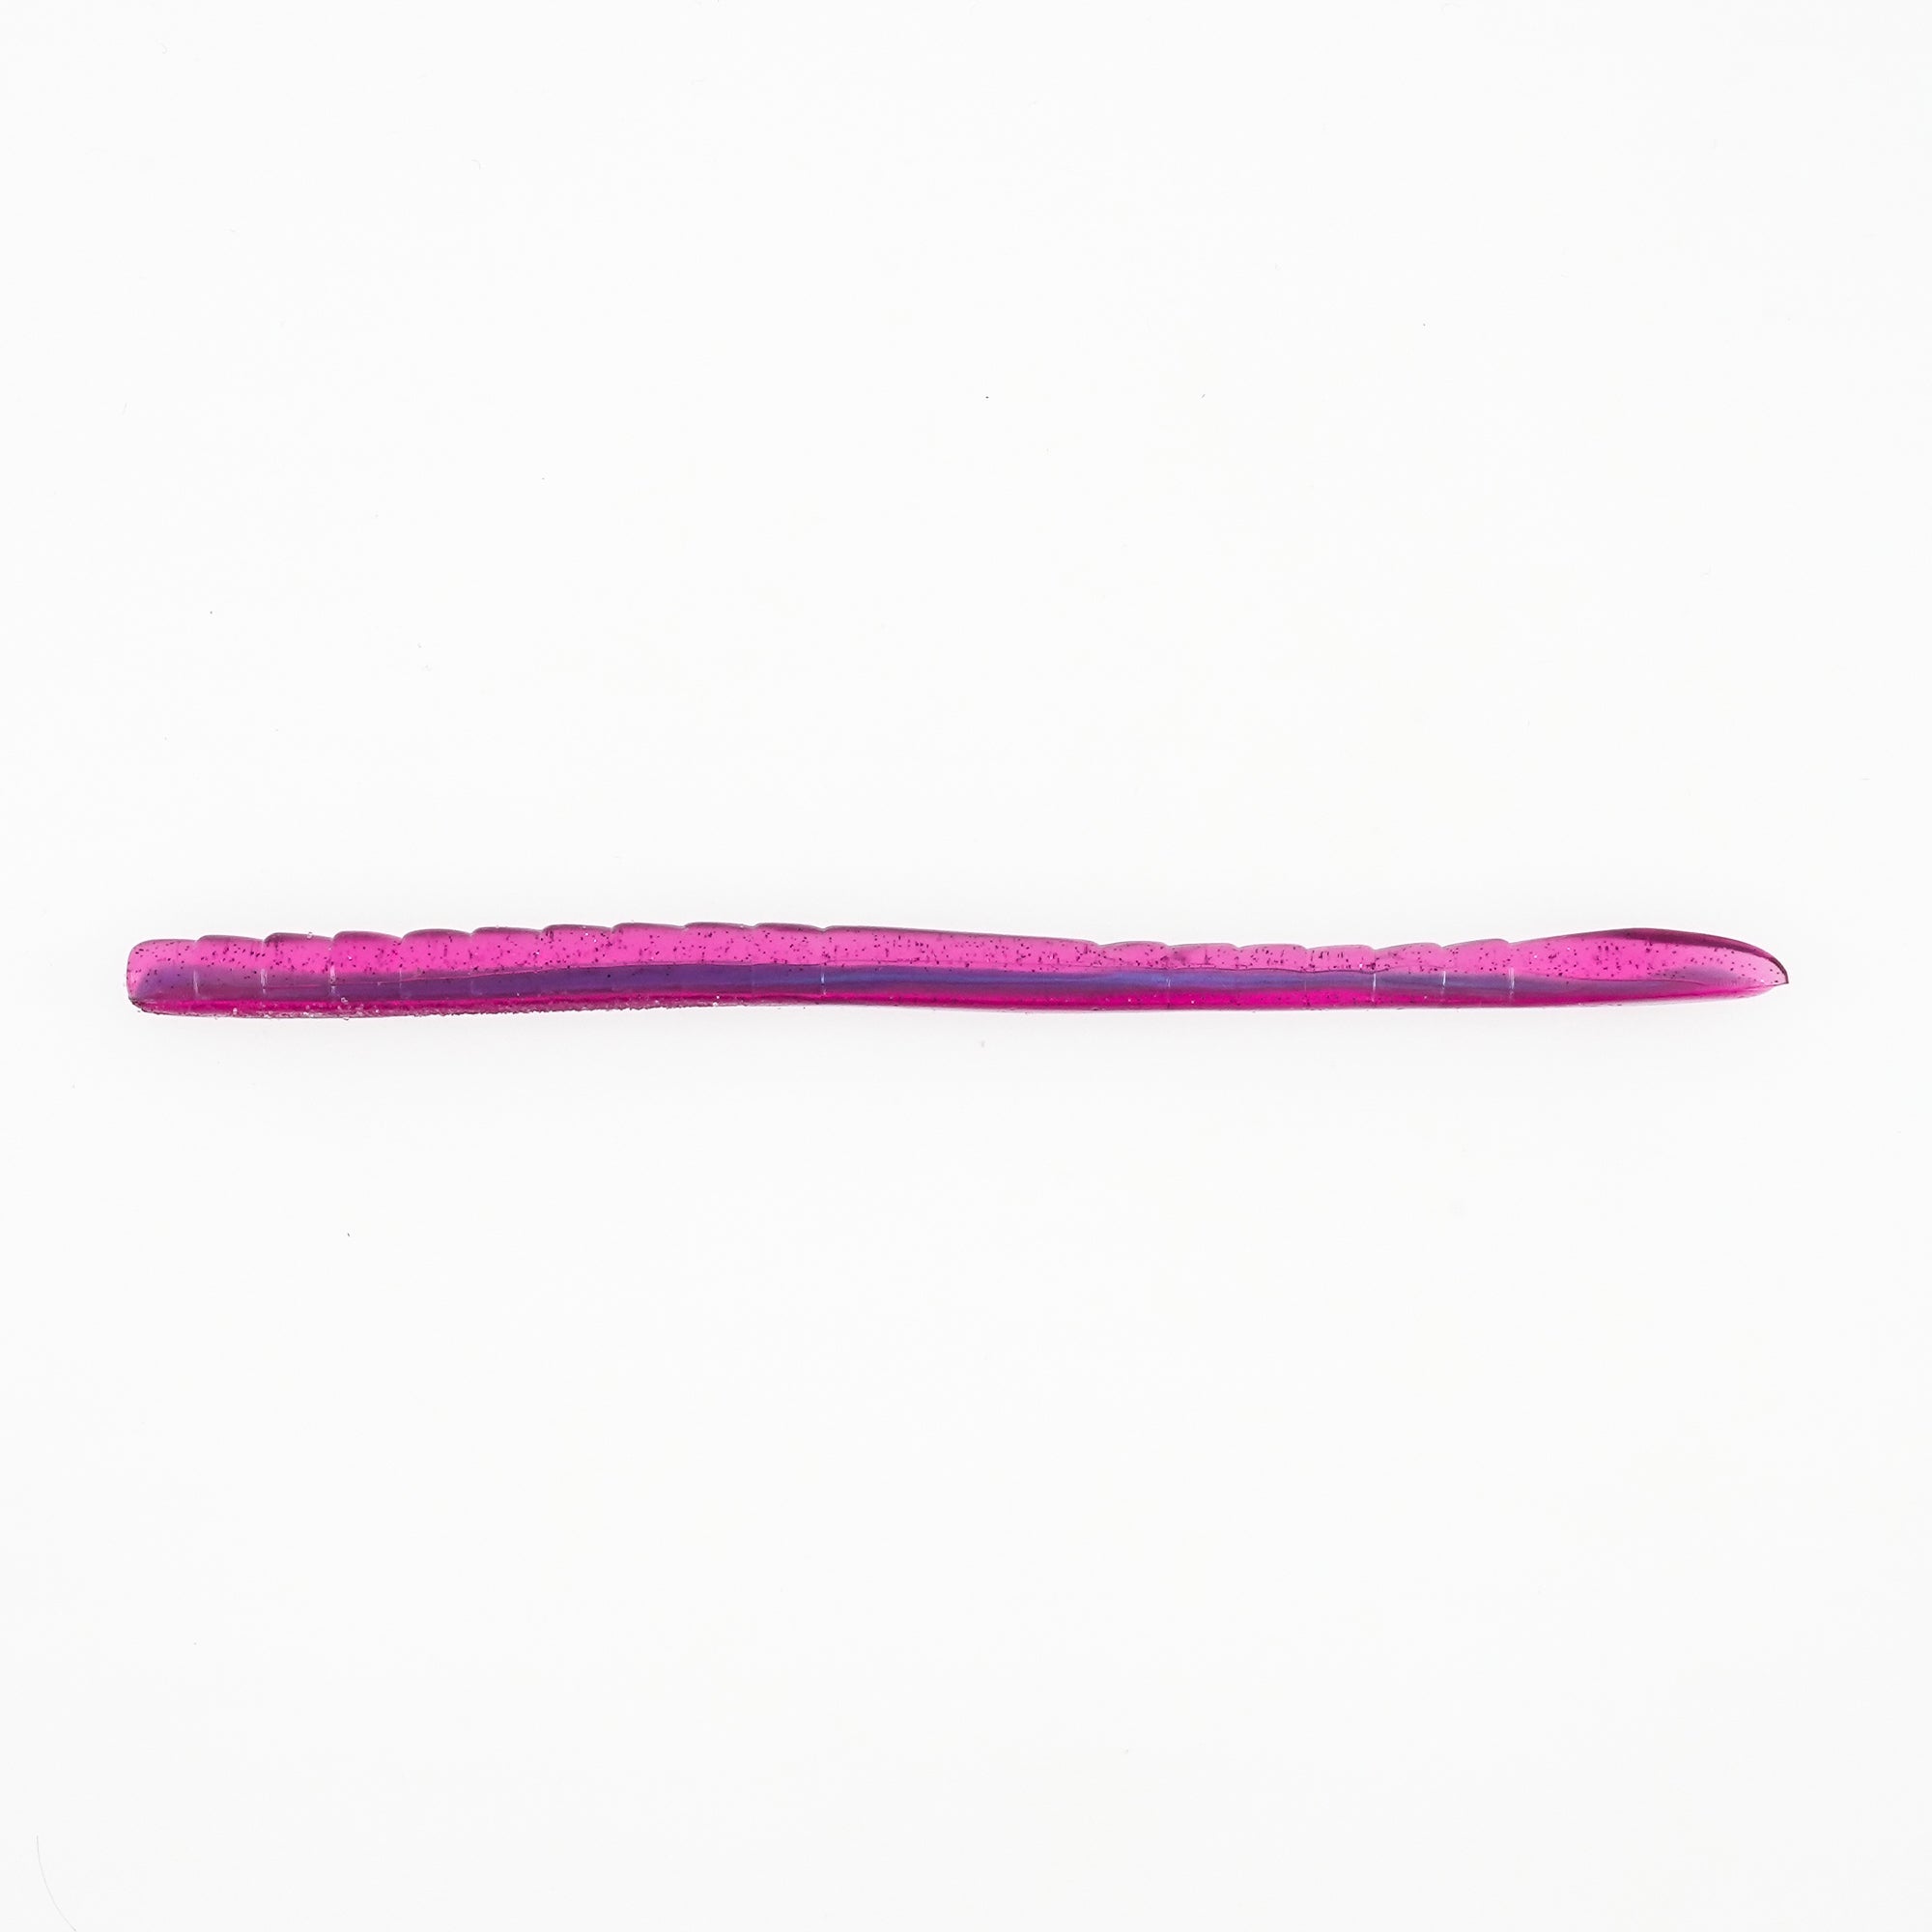 Roboworm Fat Straight Tail Worms Watermelon Magic; 4.5 in.